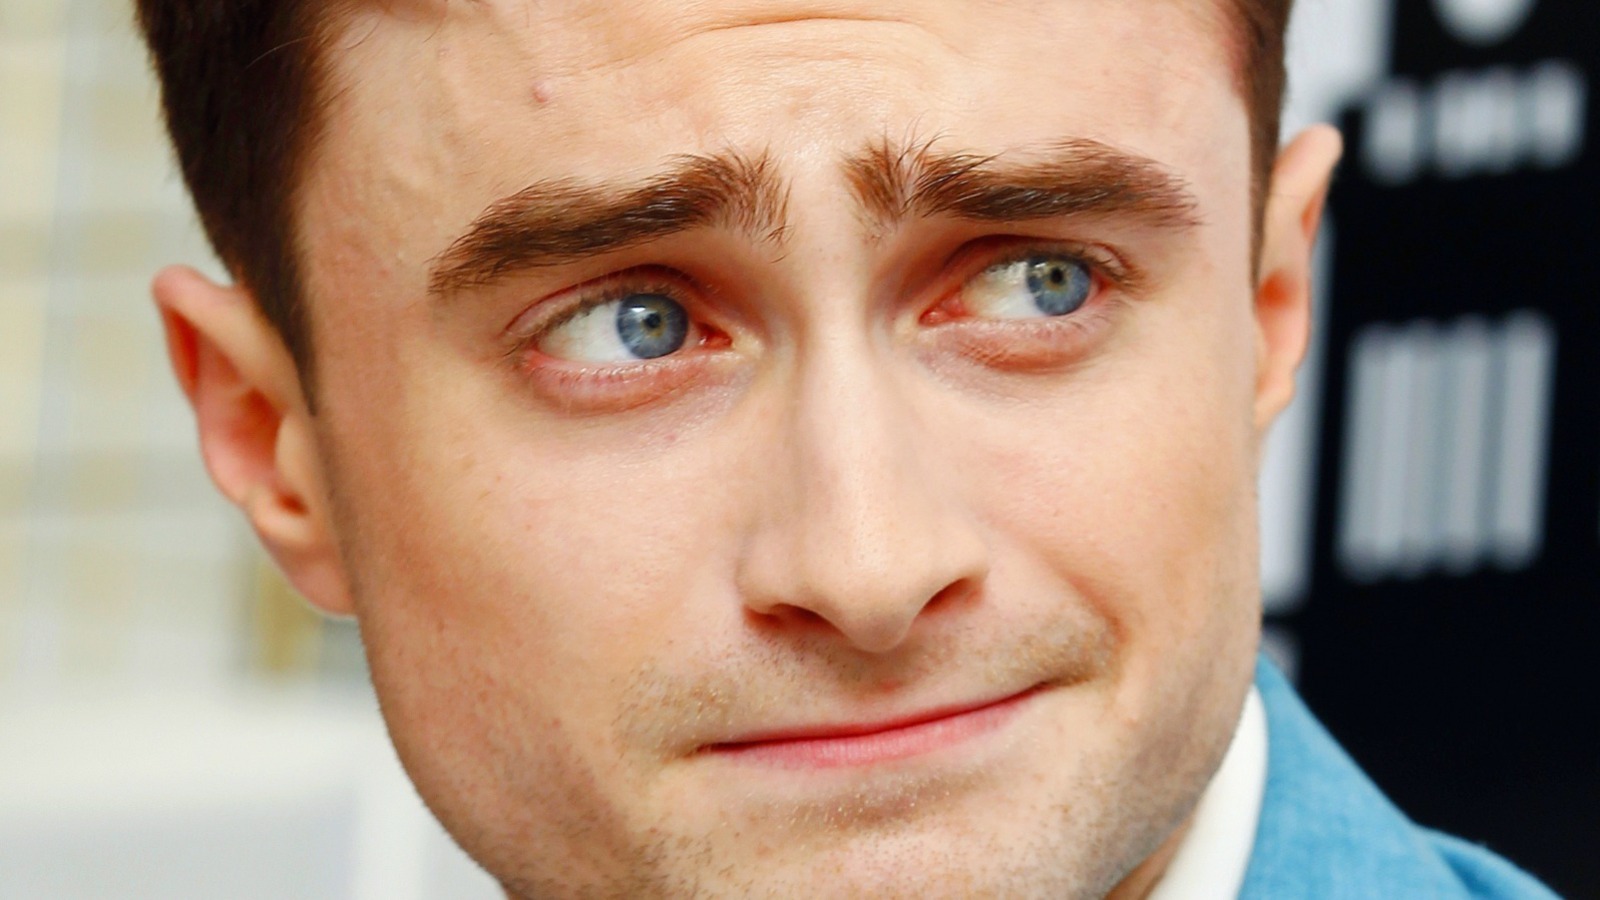 How much money did daniel radcliffe make for all harry potter movies